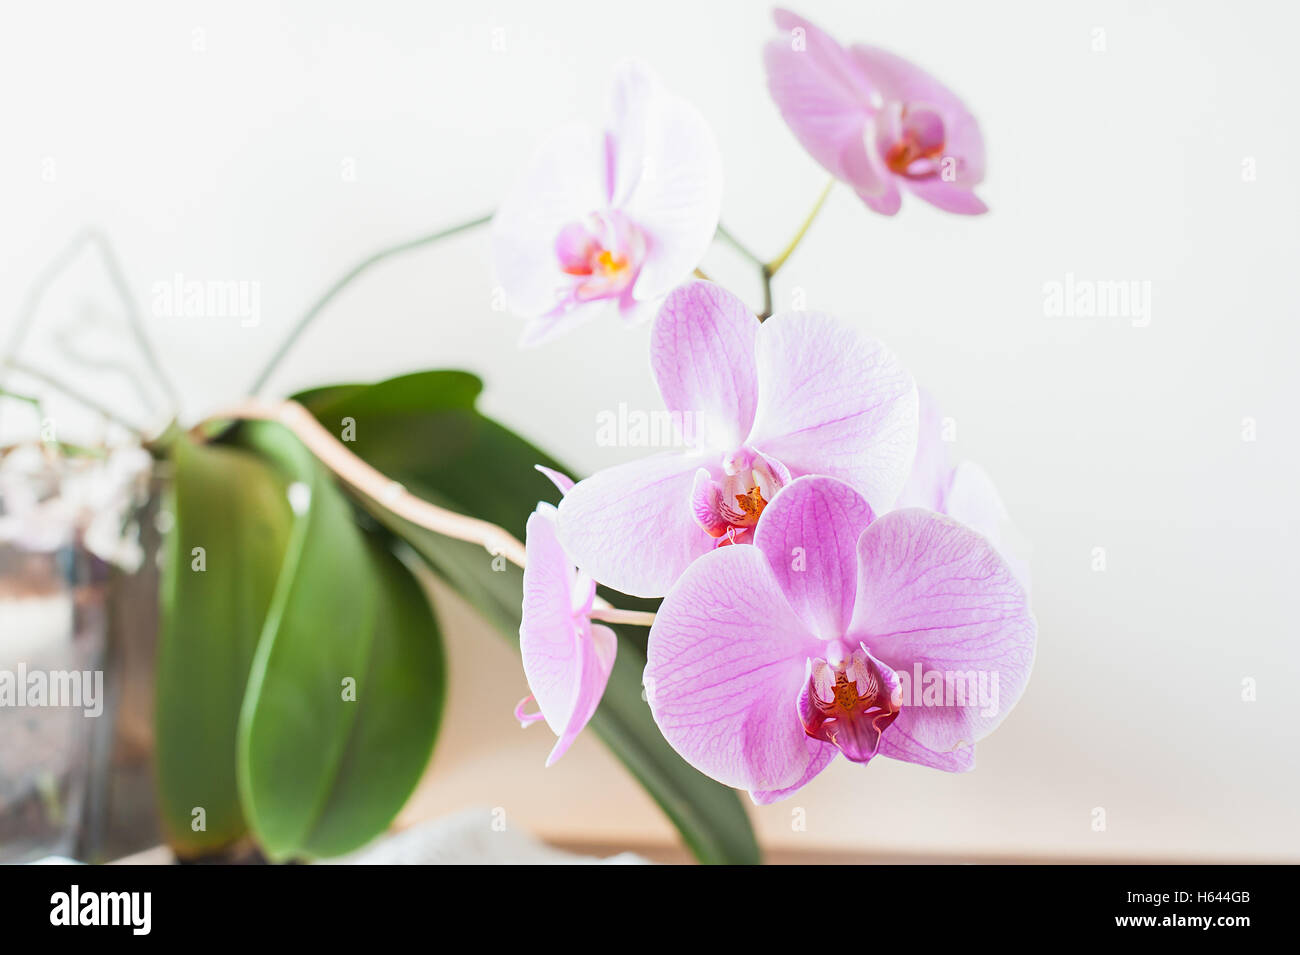 Striped pink orchid flower close up. (Orchidaceae) Stock Photo